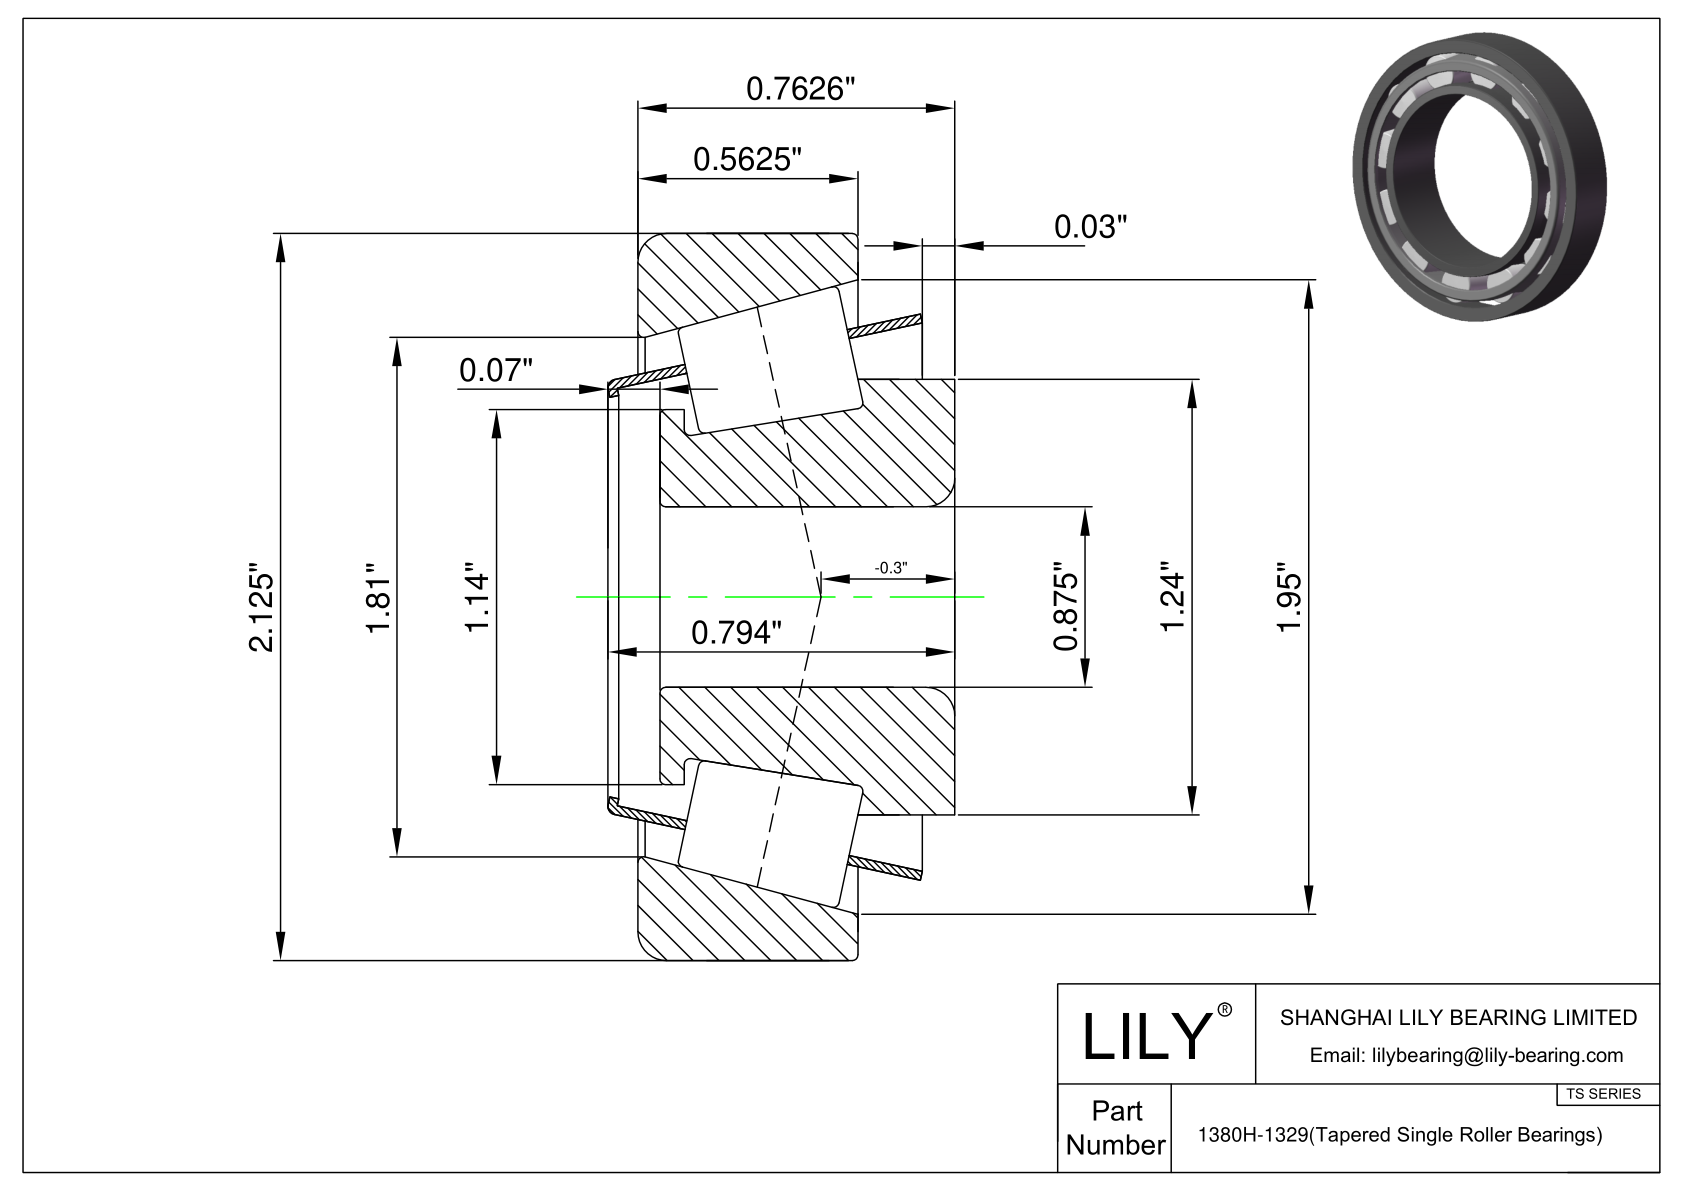 1380H-1329 TS (Tapered Single Roller Bearings) (Imperial) cad drawing